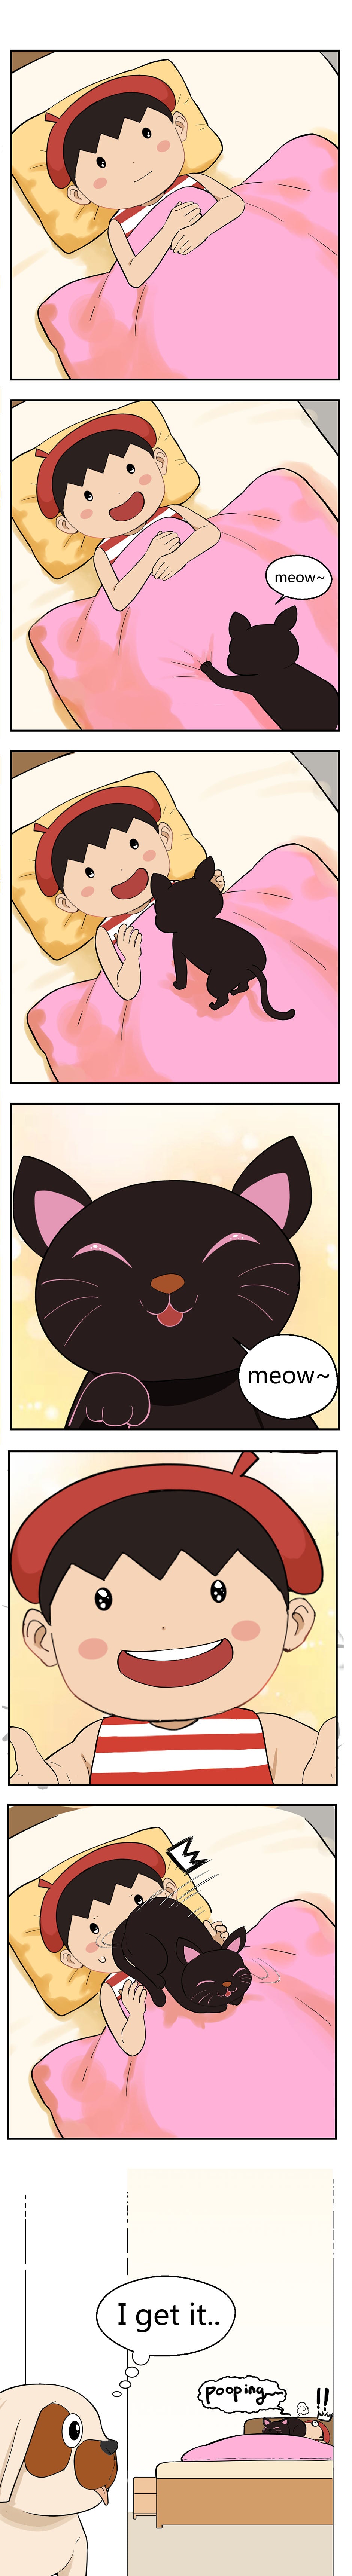 When Your Cat's Love Language is Unique magic buddies comic magic globe funny short story with cat and pets